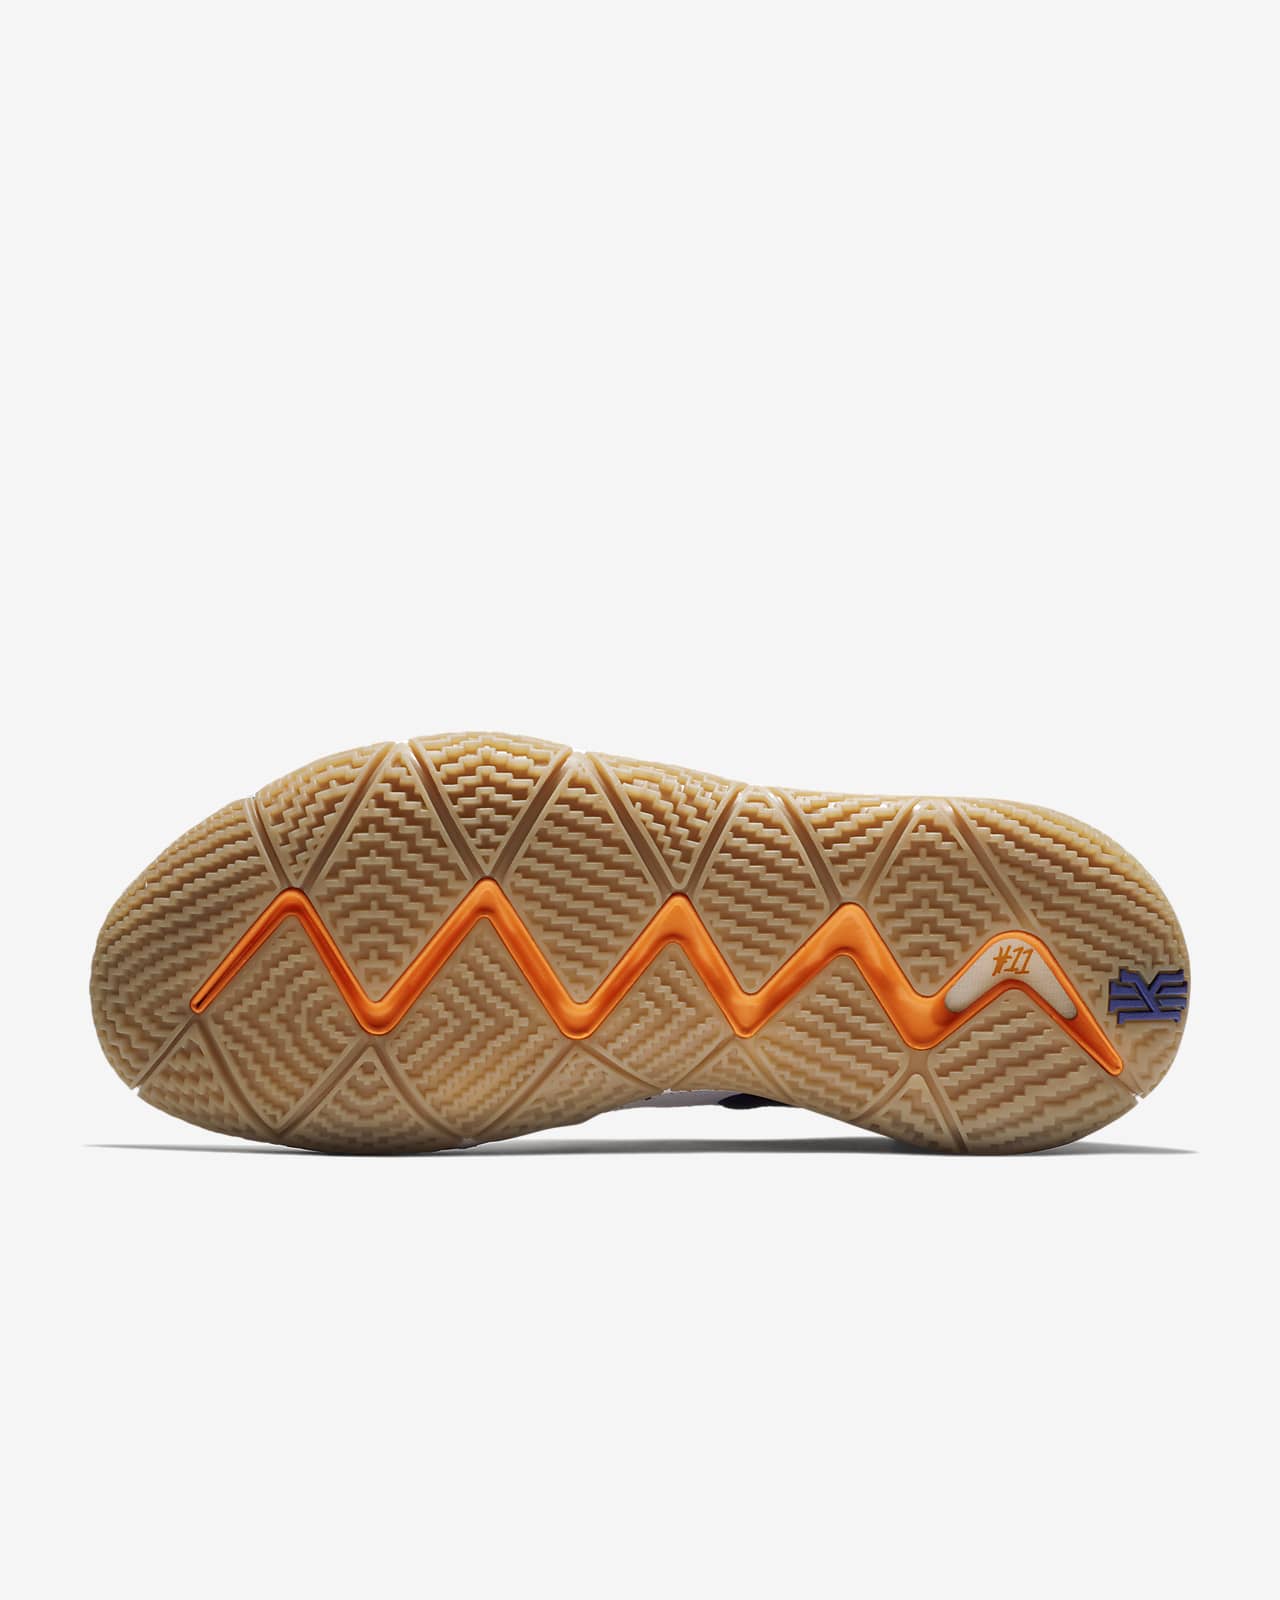 kyrie 4 uncle drew size 7